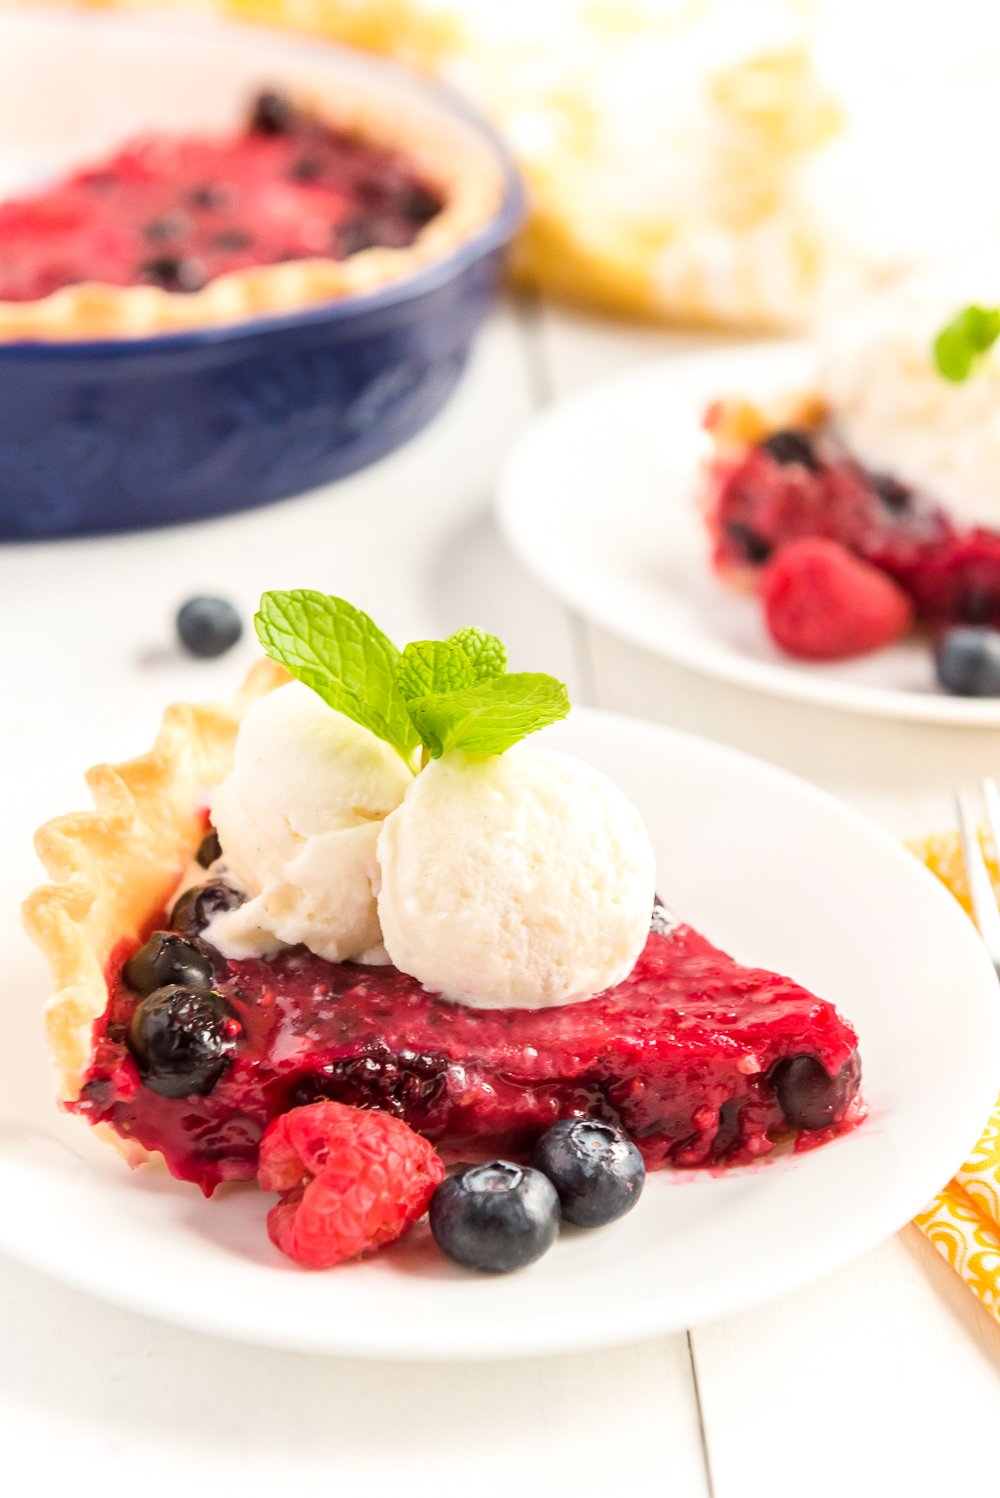 Slice of Mixed Berry Pie on a white plates with fresh berries, vanilla ice cream on top, and a sprig of mint.